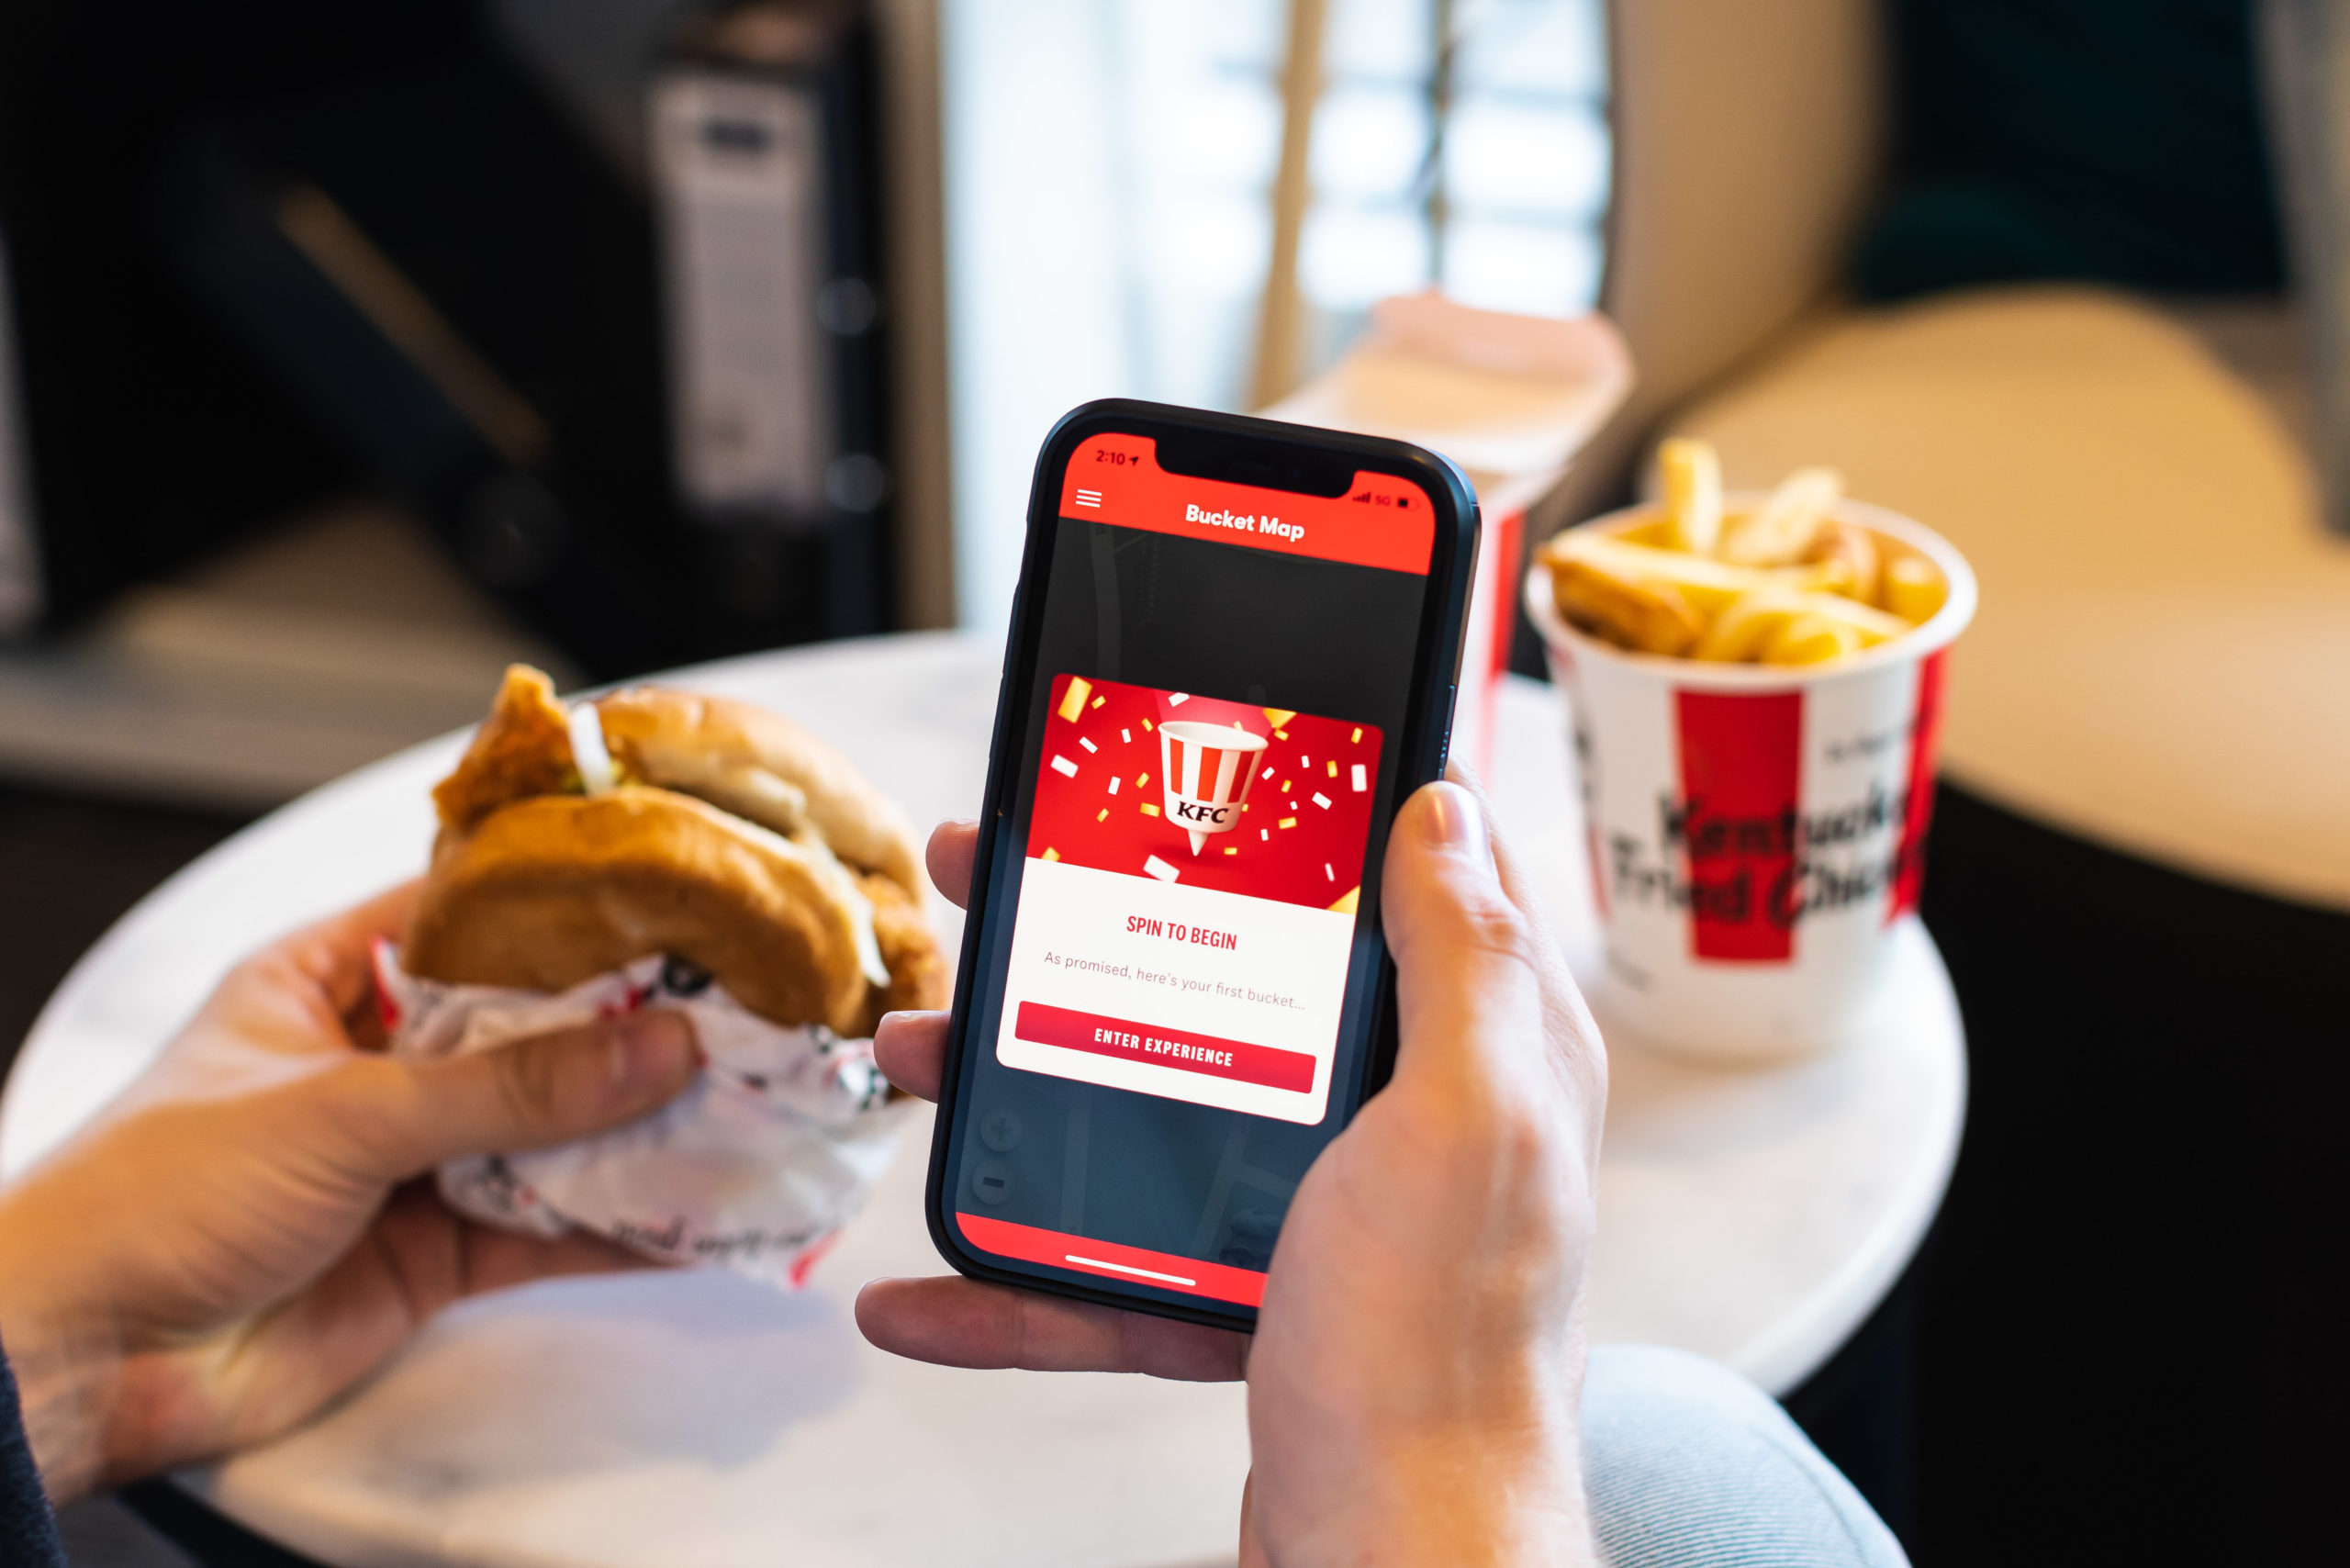 KFC Is Giving Away Free Food and up to $50k With Its New Mobile Game